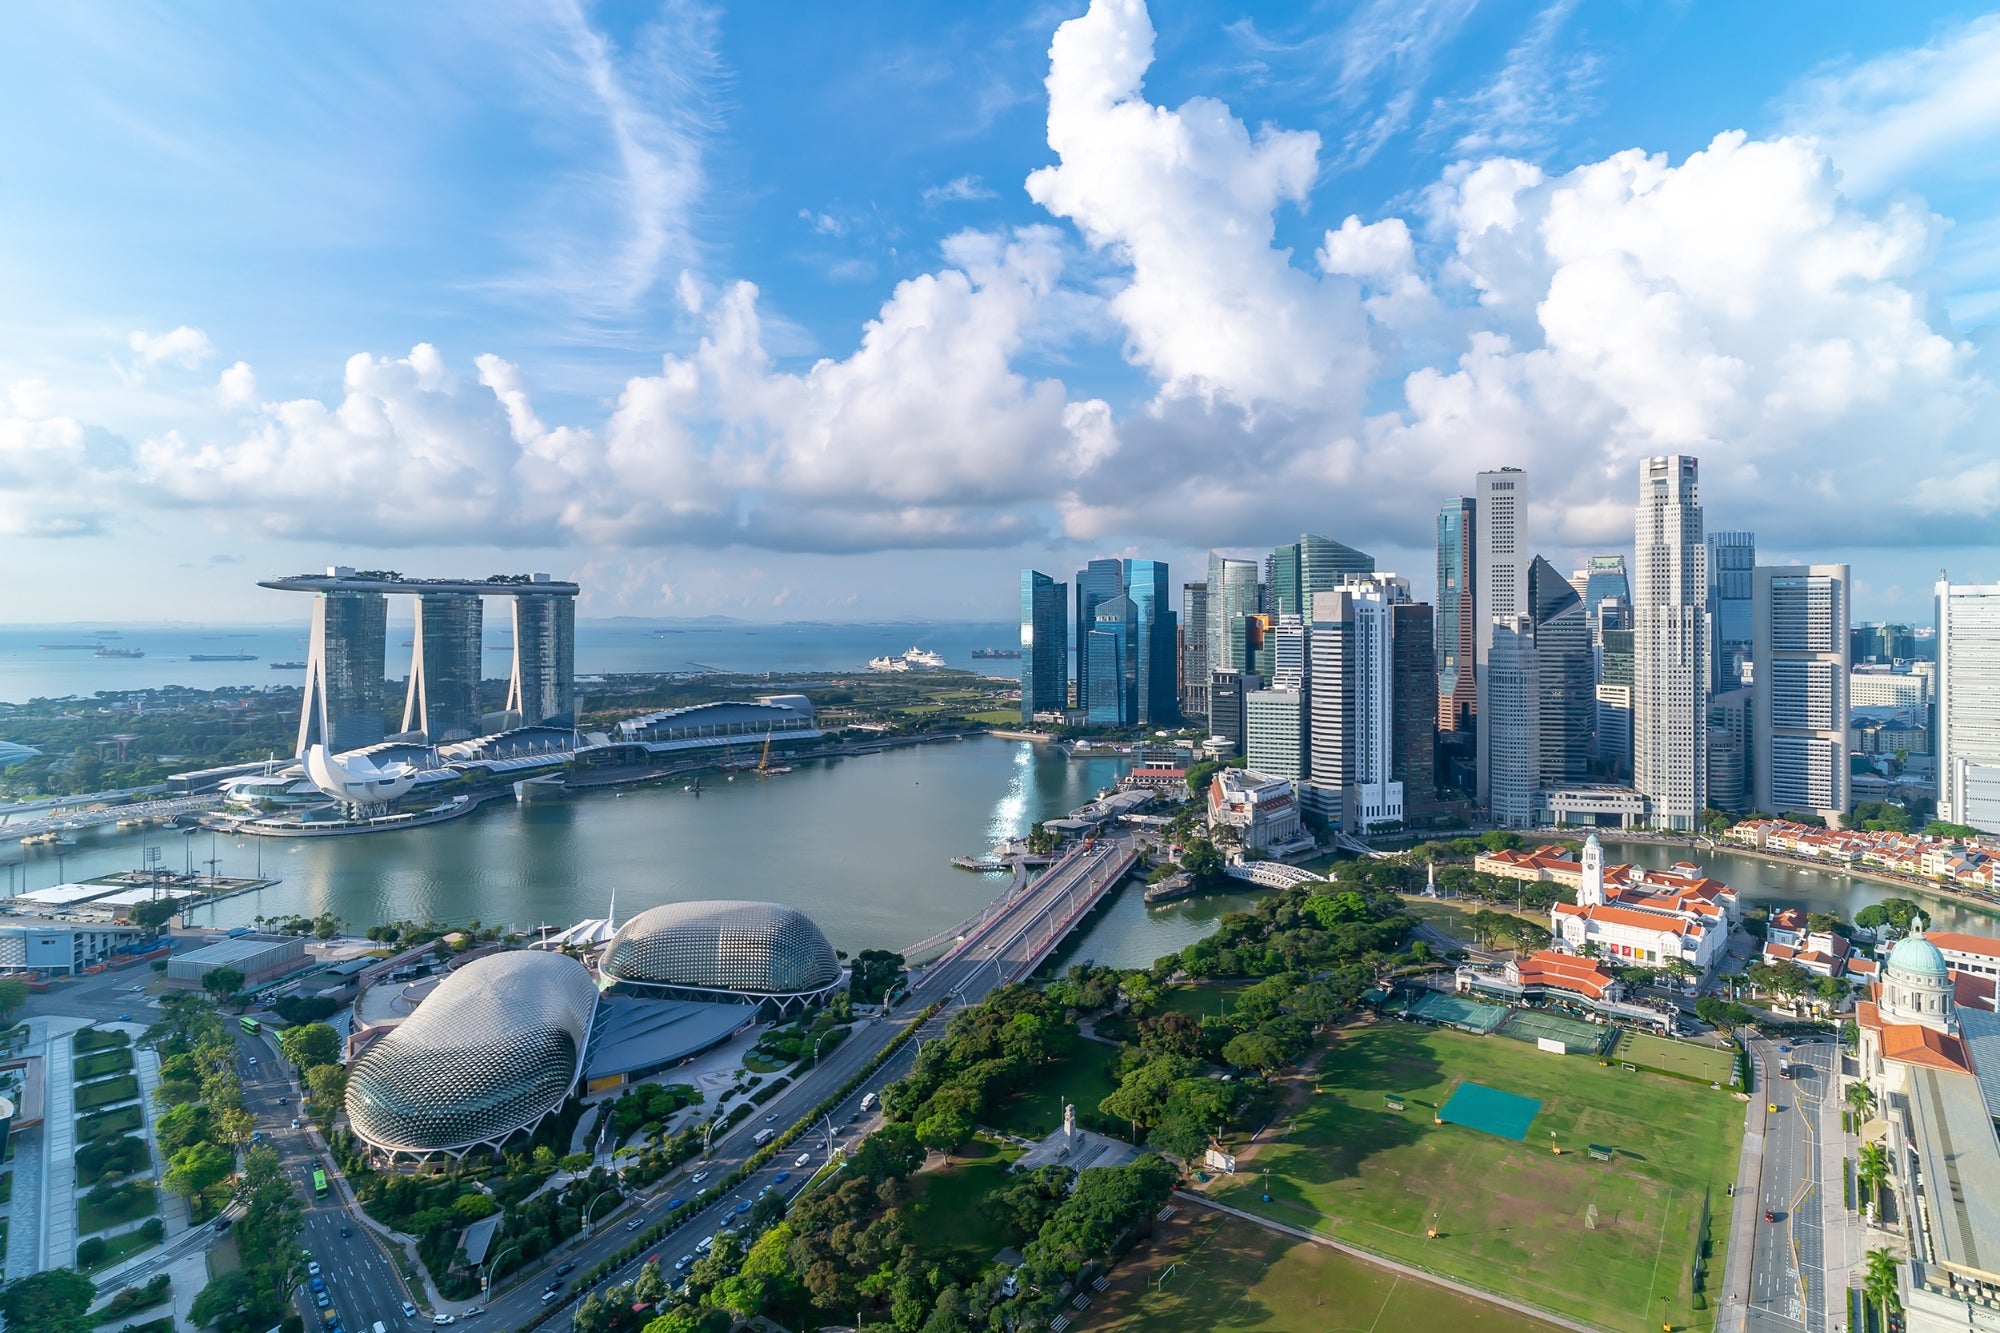 4 Reasons Why Singapore Will Quietly Become the World's Leading Industrial Hub